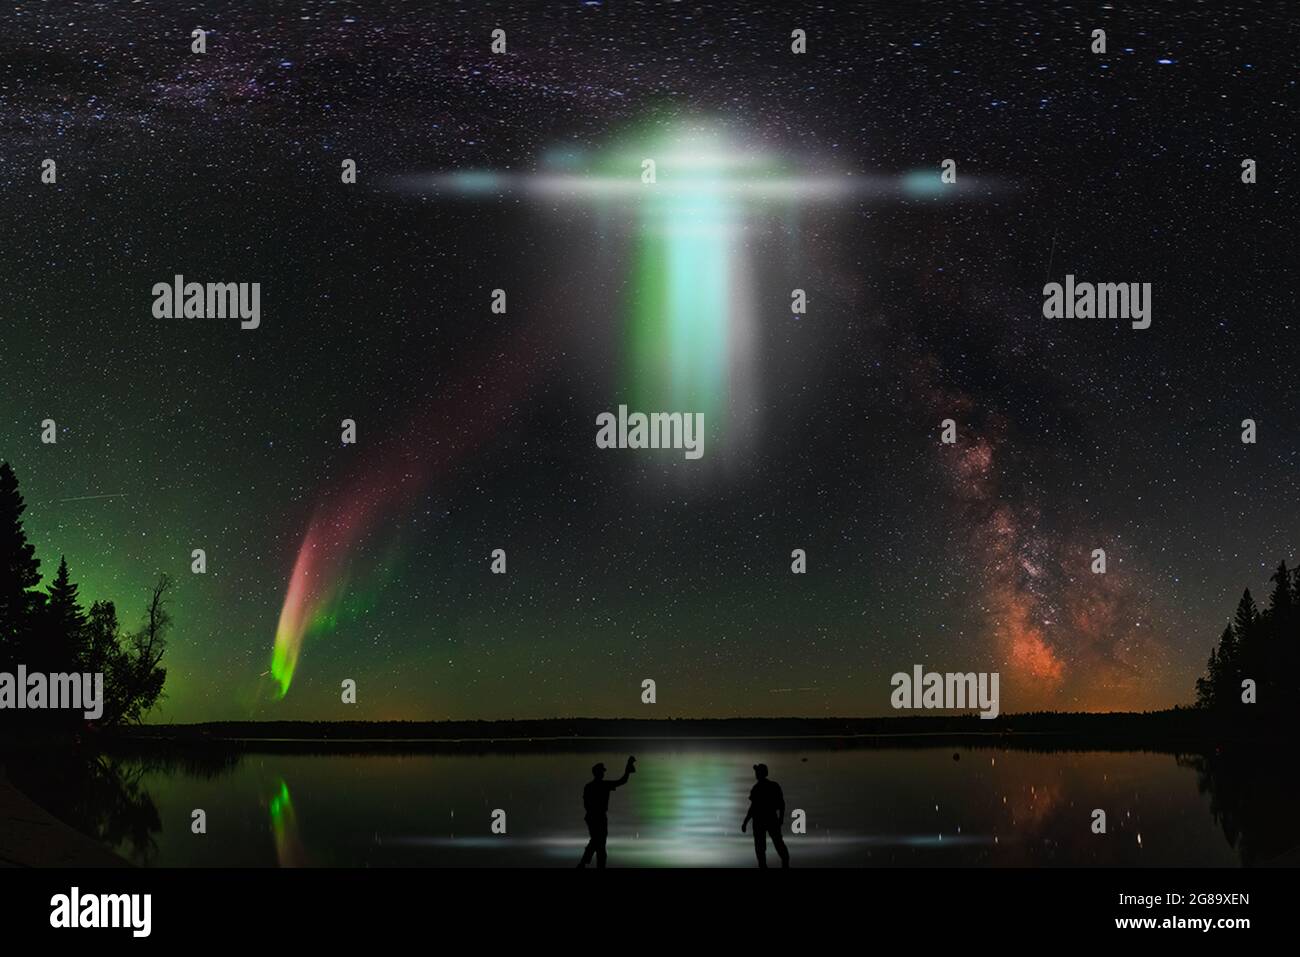 People are watching UFOs in the night sky. Elements of this image furnished by NASA. Stock Photo